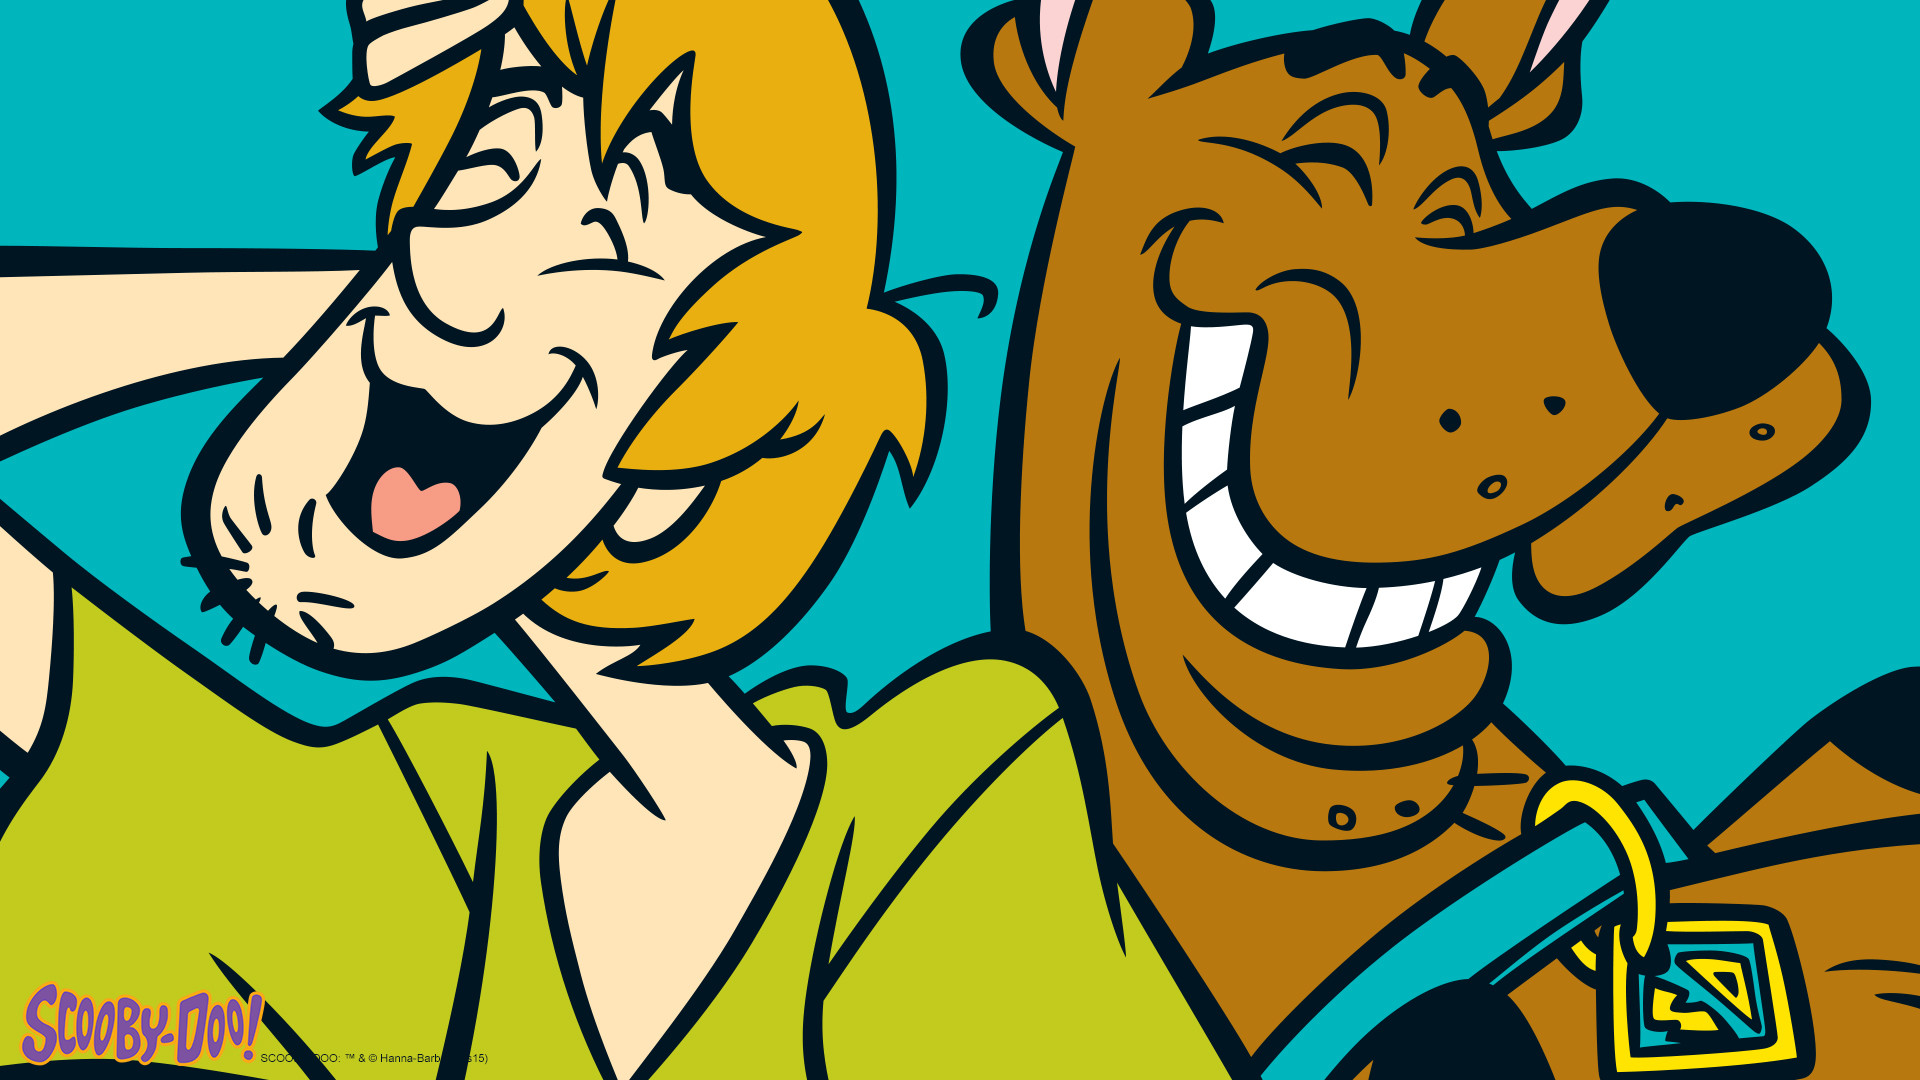 1920x1080 Scooby-Doo images Scooby And Shaggy HD wallpaper and background p...